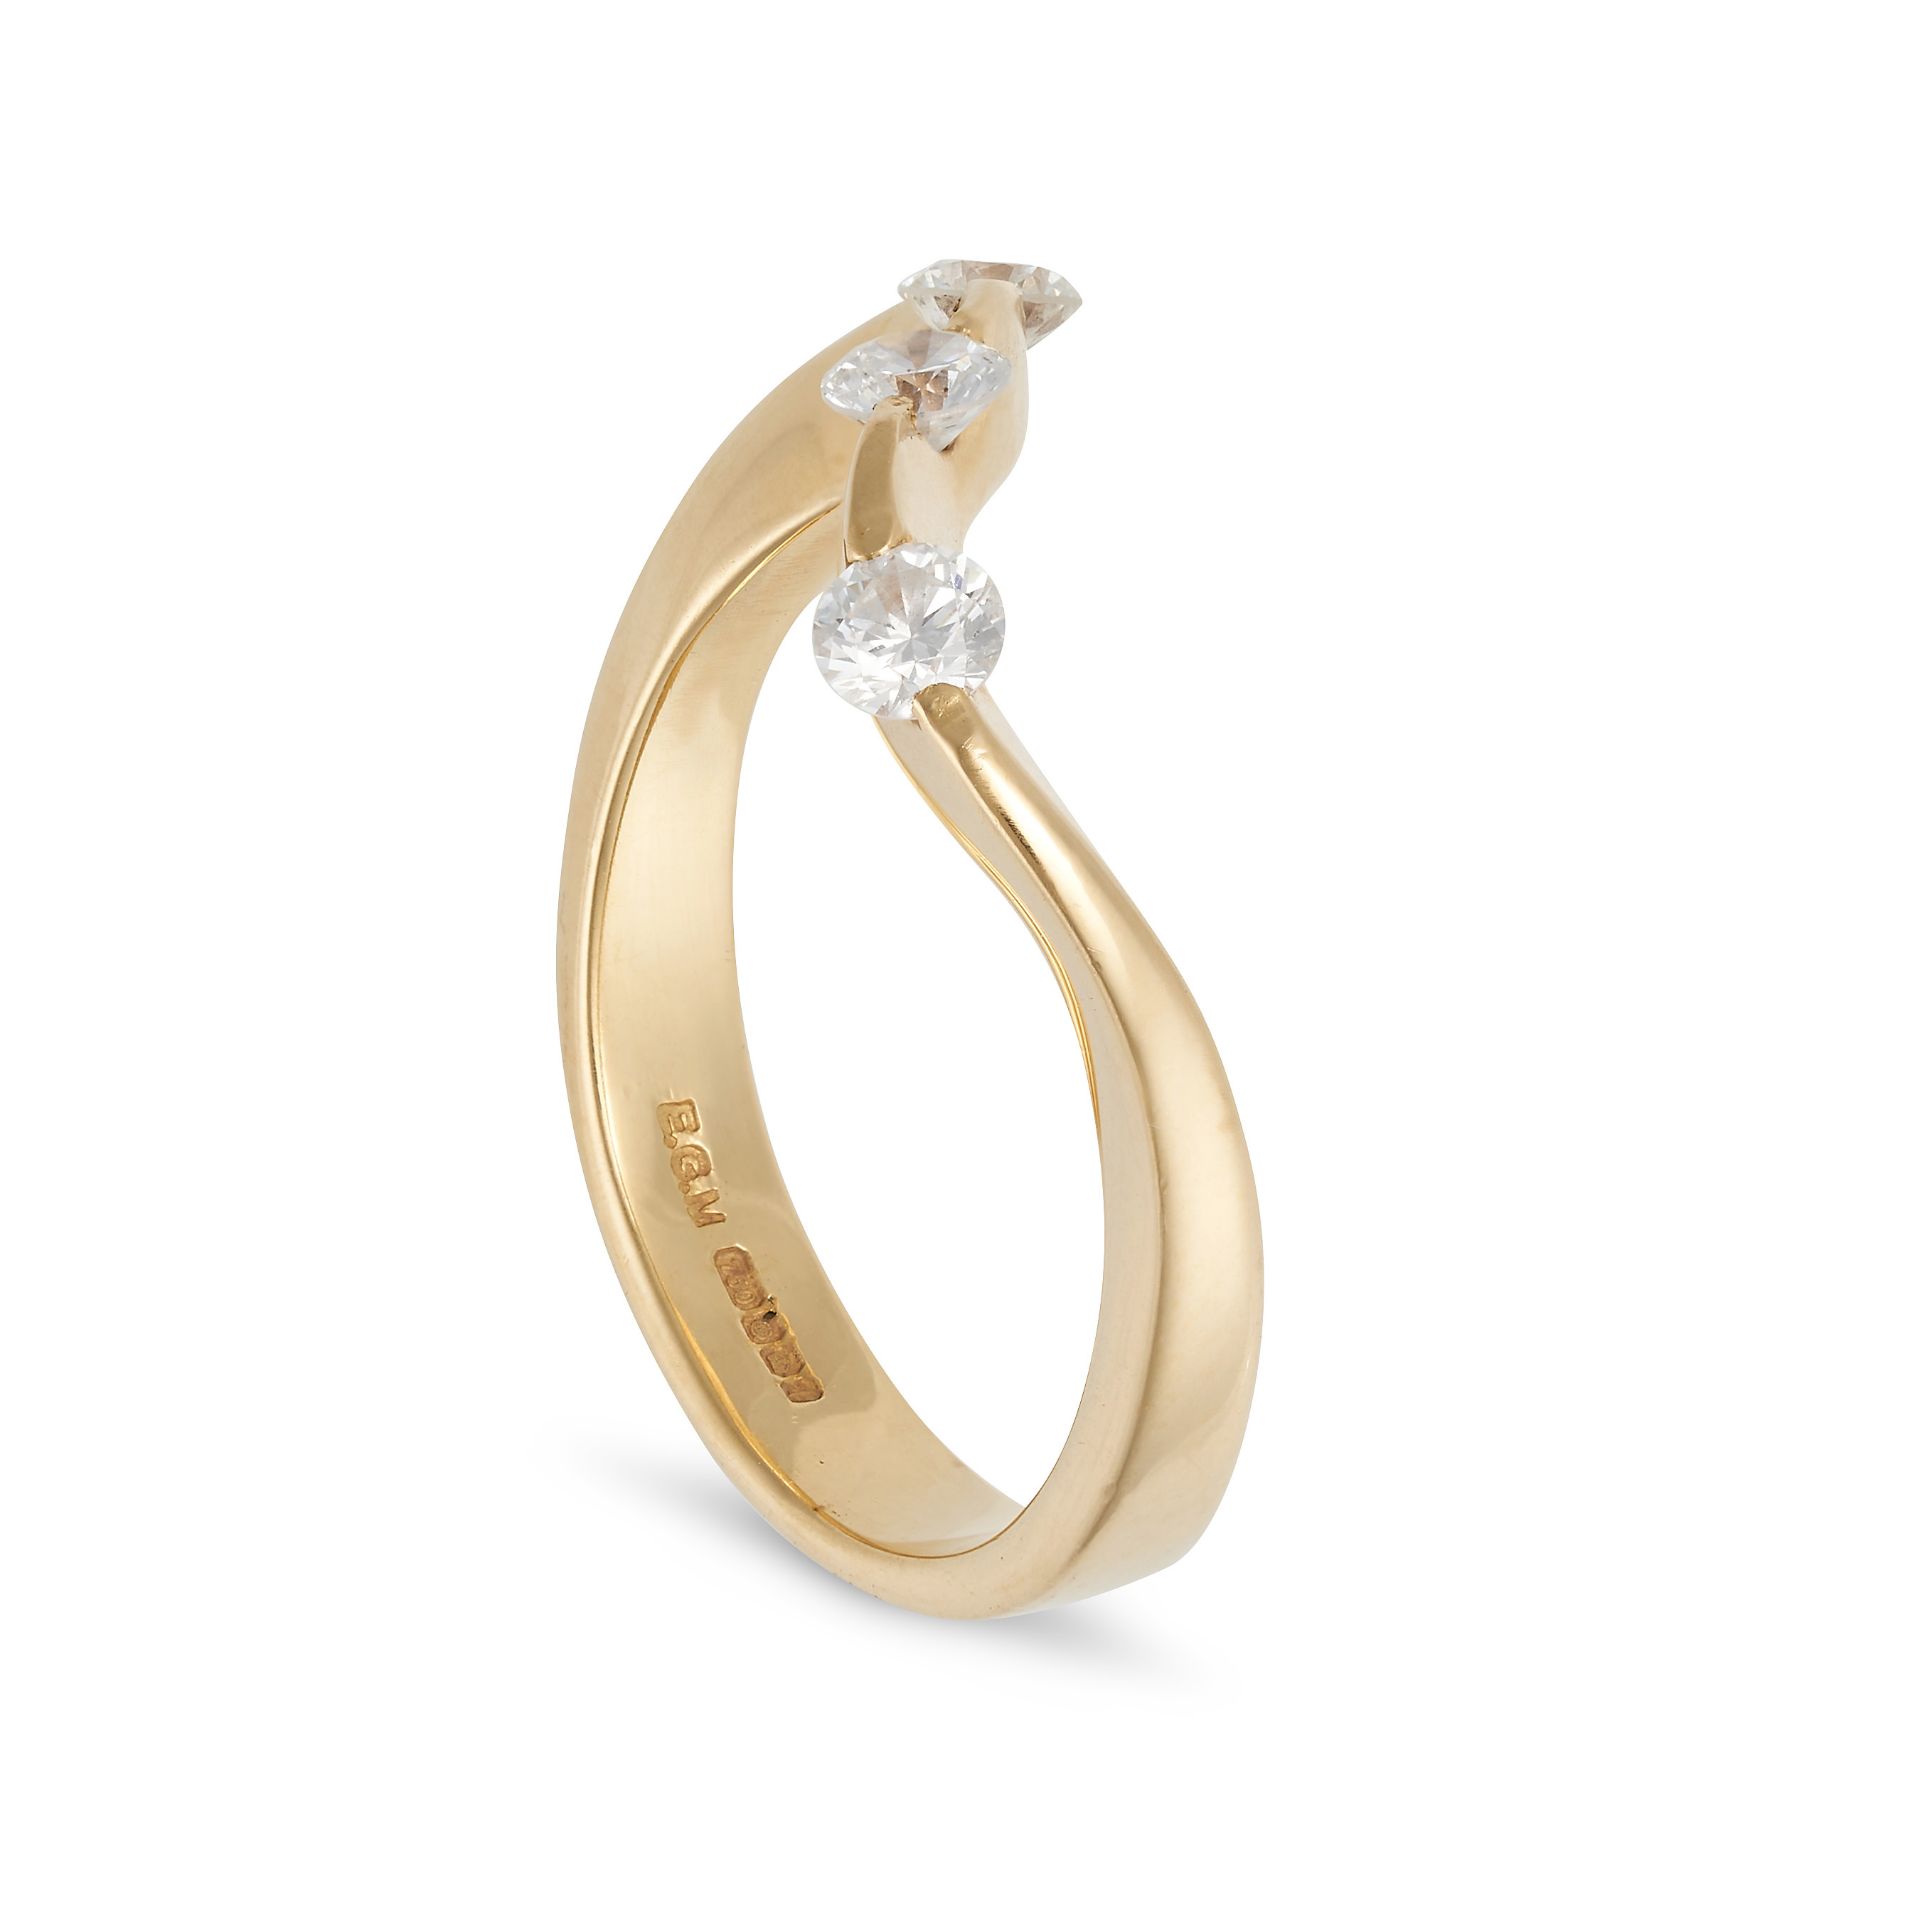 NO RESERVE - A DIAMOND DRESS RING in 18ct yellow gold, in a wave design set with three round bril... - Image 2 of 2